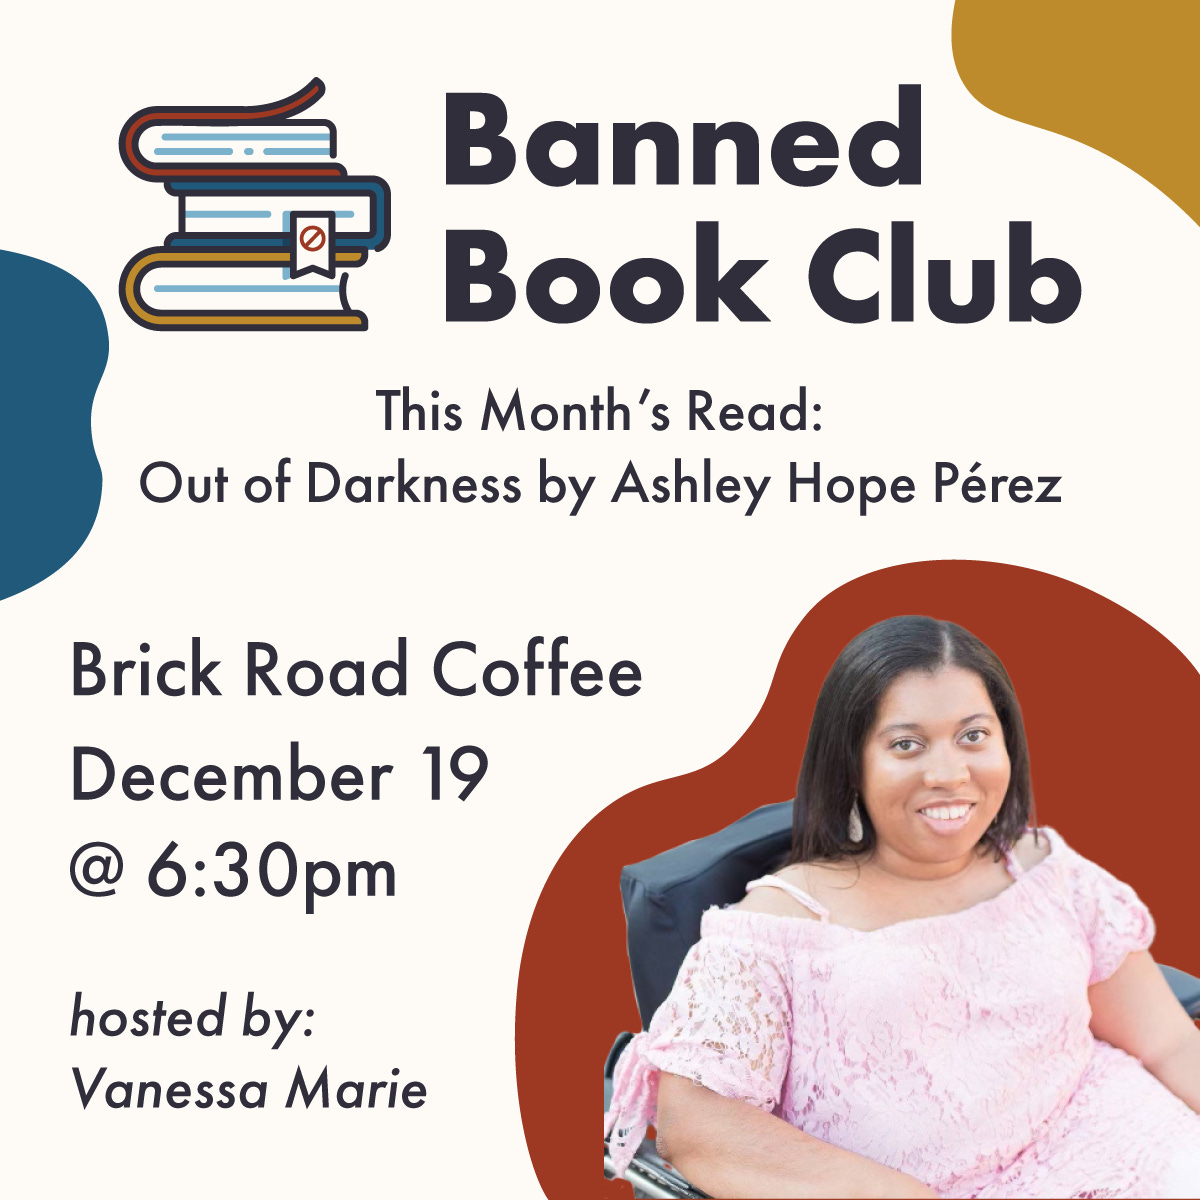 On an off-white background, there is a title that reads “Banned Book Club” with a little illustrated stack of books next to it. In smaller text below this, it says “This Month’s Read: Out of Darkness by Ashley Hope Pérez.” Then there is the location, “Brick Road Coffee” followed by the date and time, “December 19 @ 6:30 PM” At the bottom of the image in italics, it reads “hosted by: Vanessa Marie.” Next to this is a photo of Vanessa Marie, the book club host.